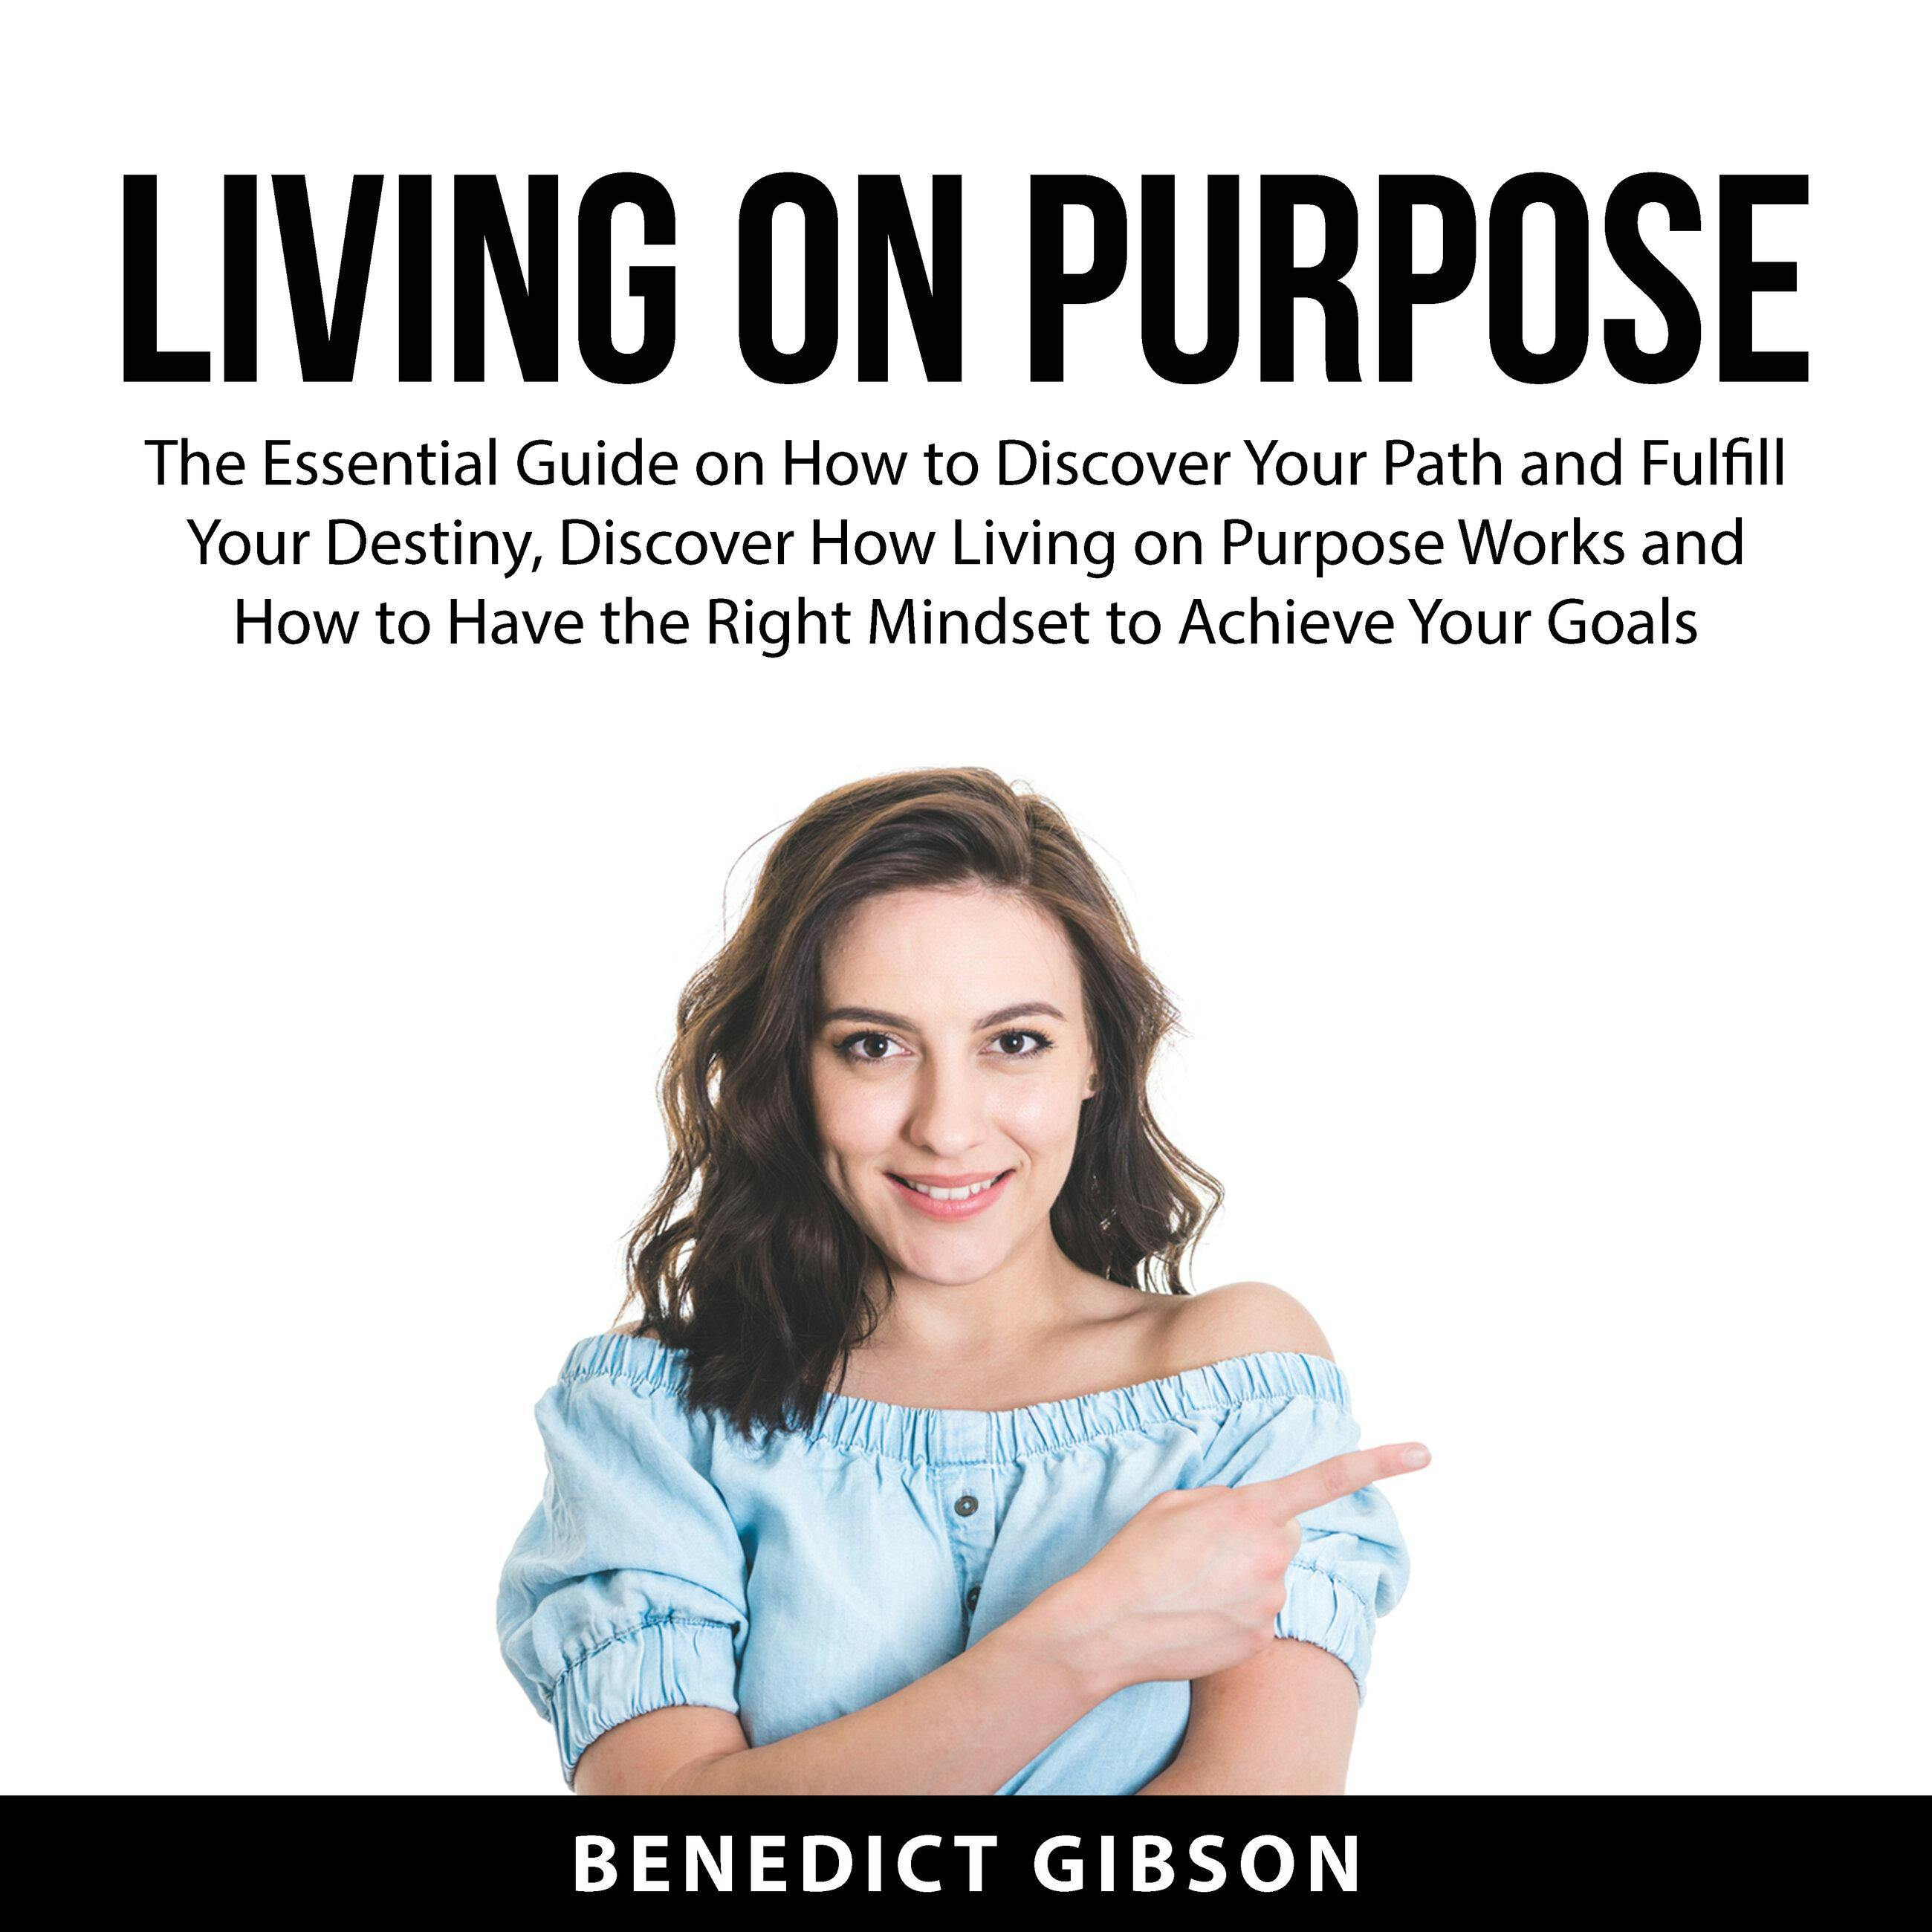 Living On Purpose: The Essential Guide on How to Discover Your Path and Fulfill Your Destiny, Discover How Living on Purpose Works and How to Have the Right Mindset to Achieve Your Goals - Benedict Gibson